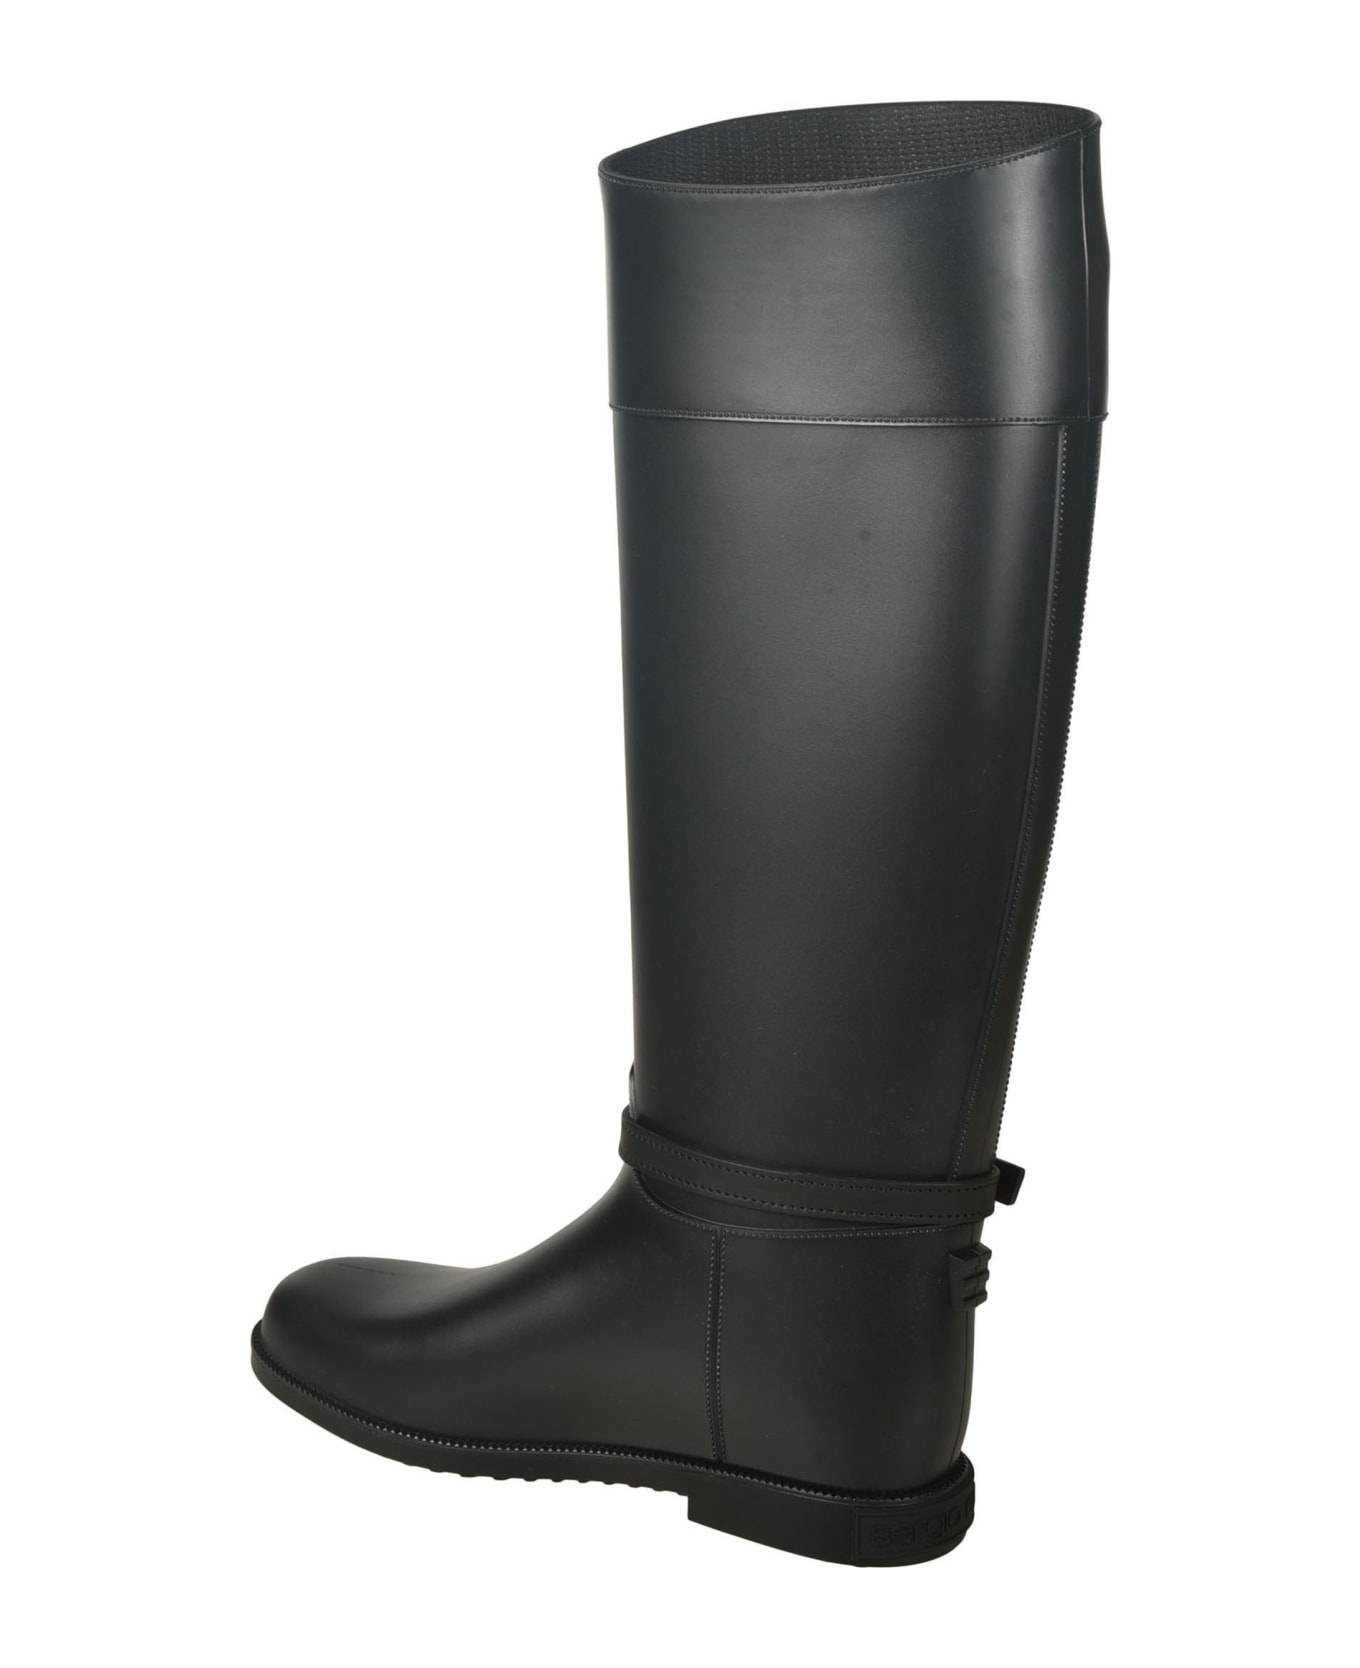 Sergio Rossi Ankle Buckle Boots - Black